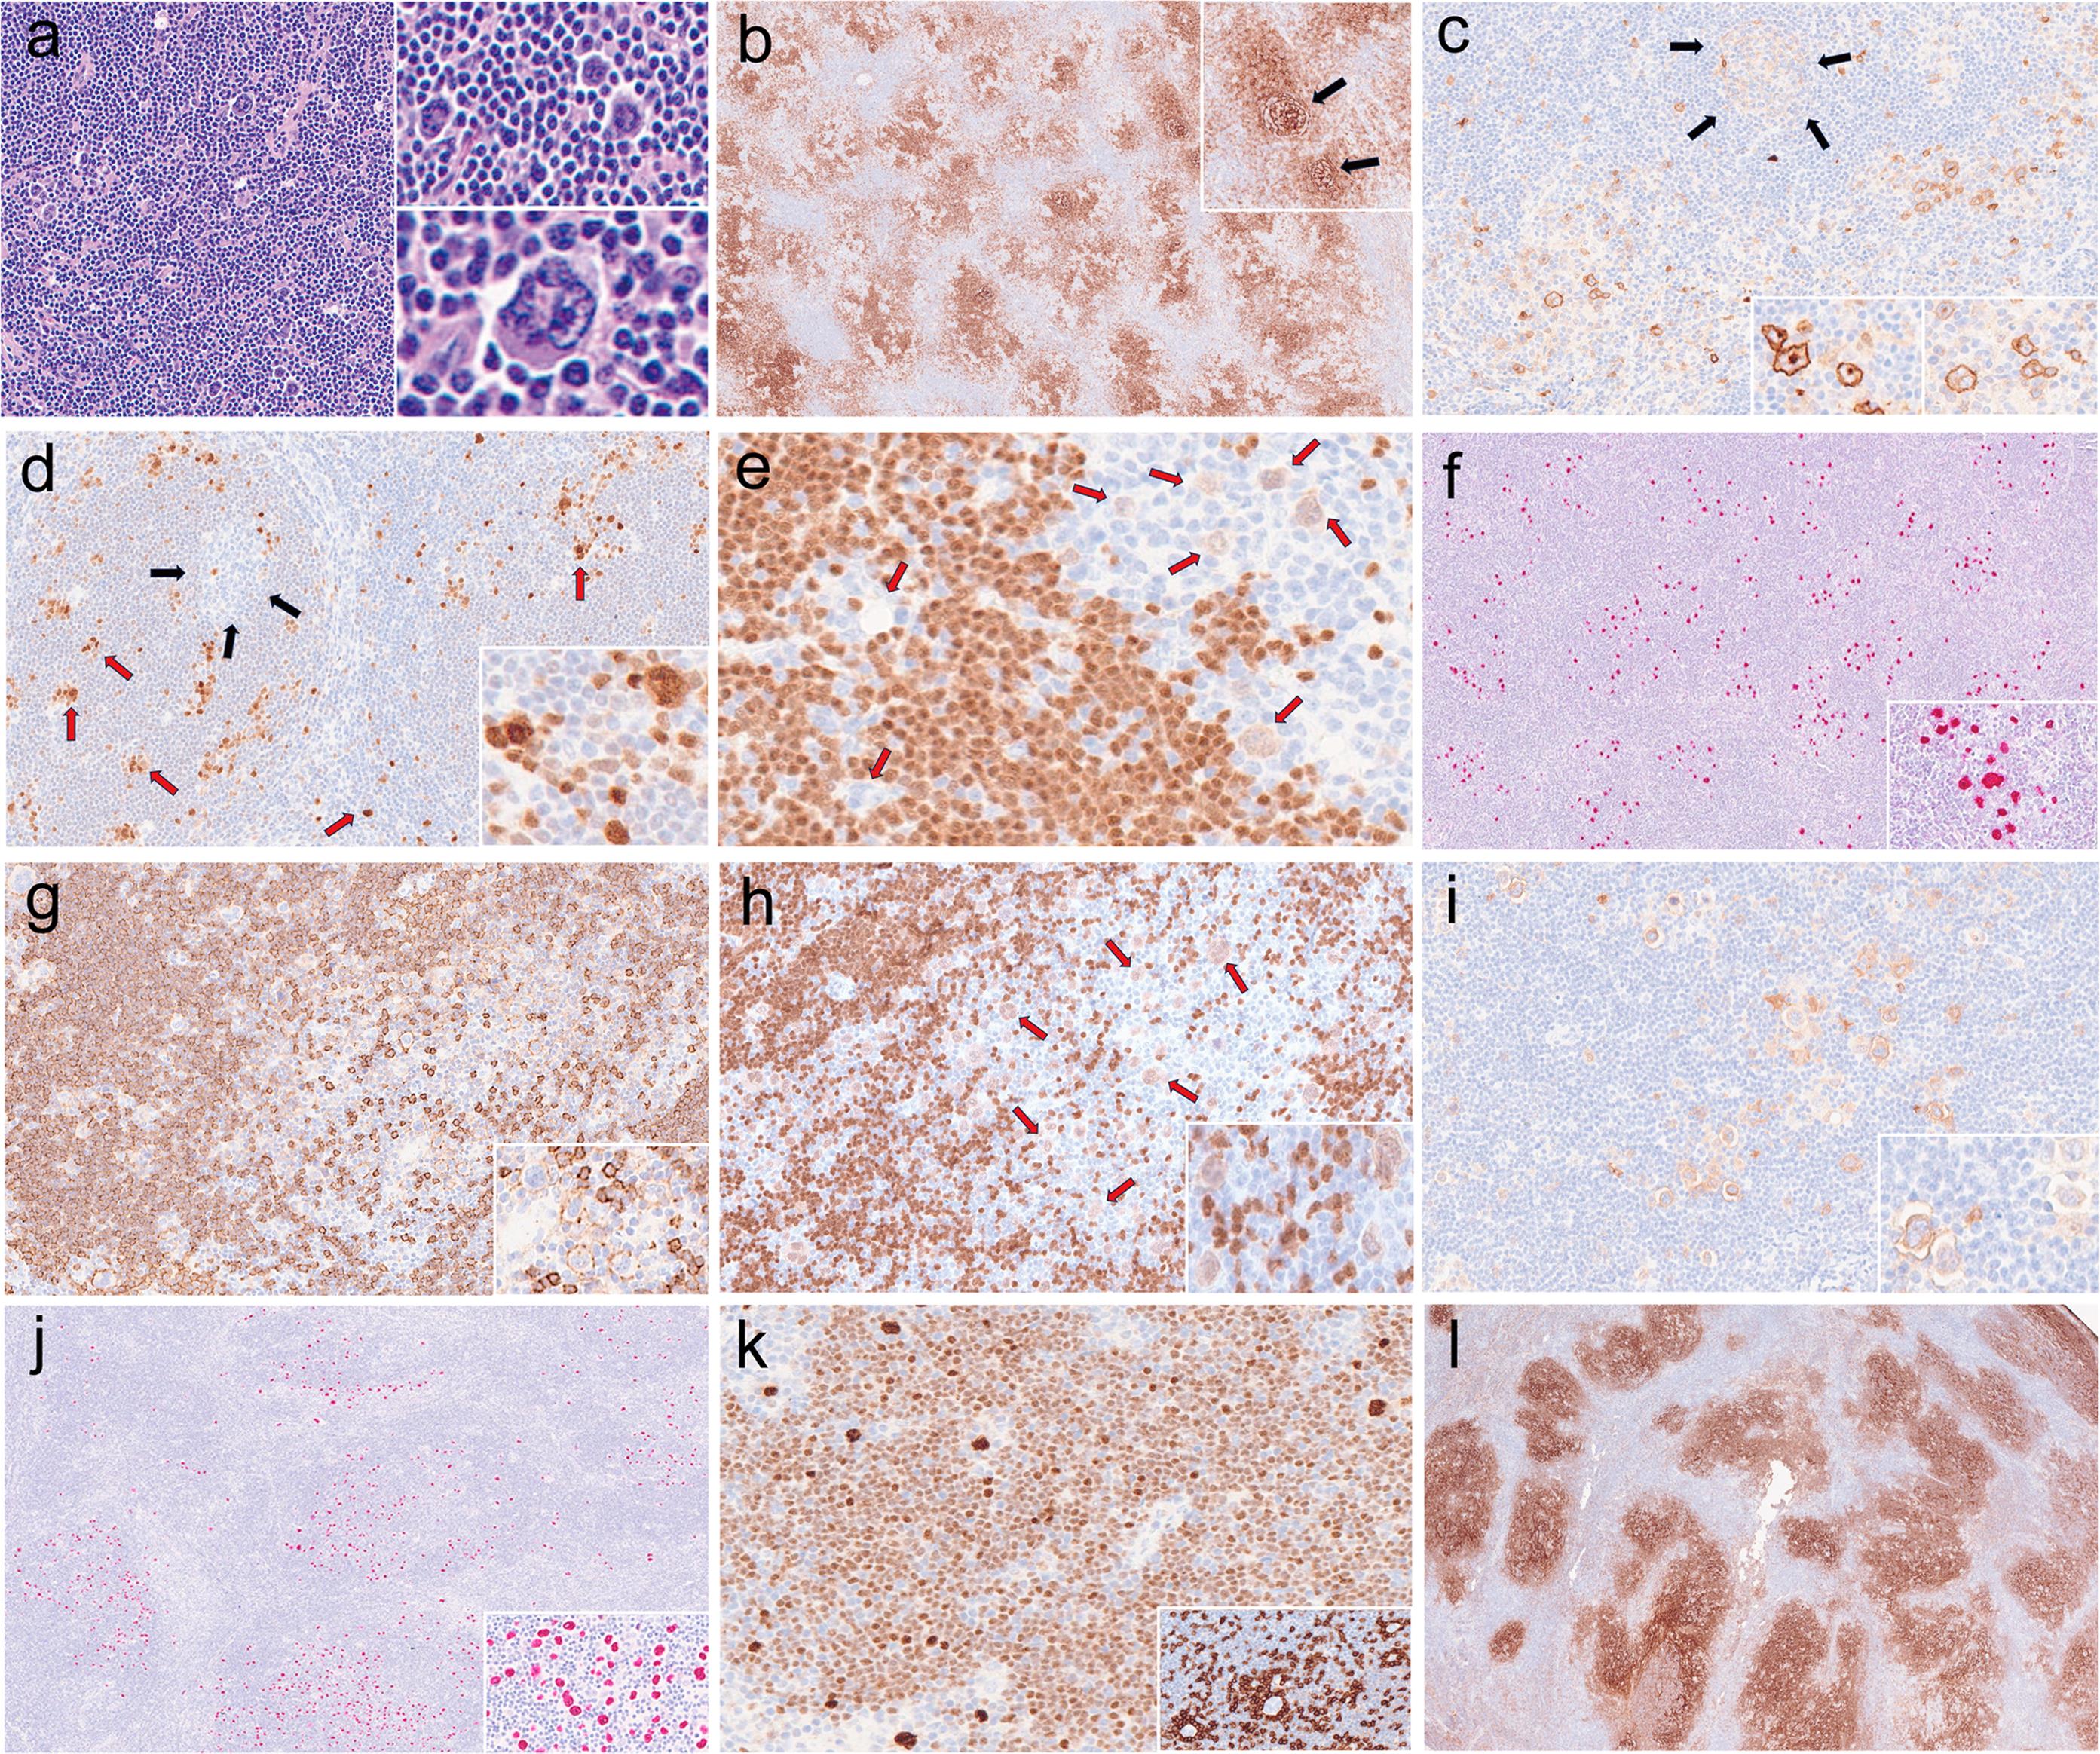 The histologic and immunohistochemical features of LRCHL vs. EBV+ NLP.